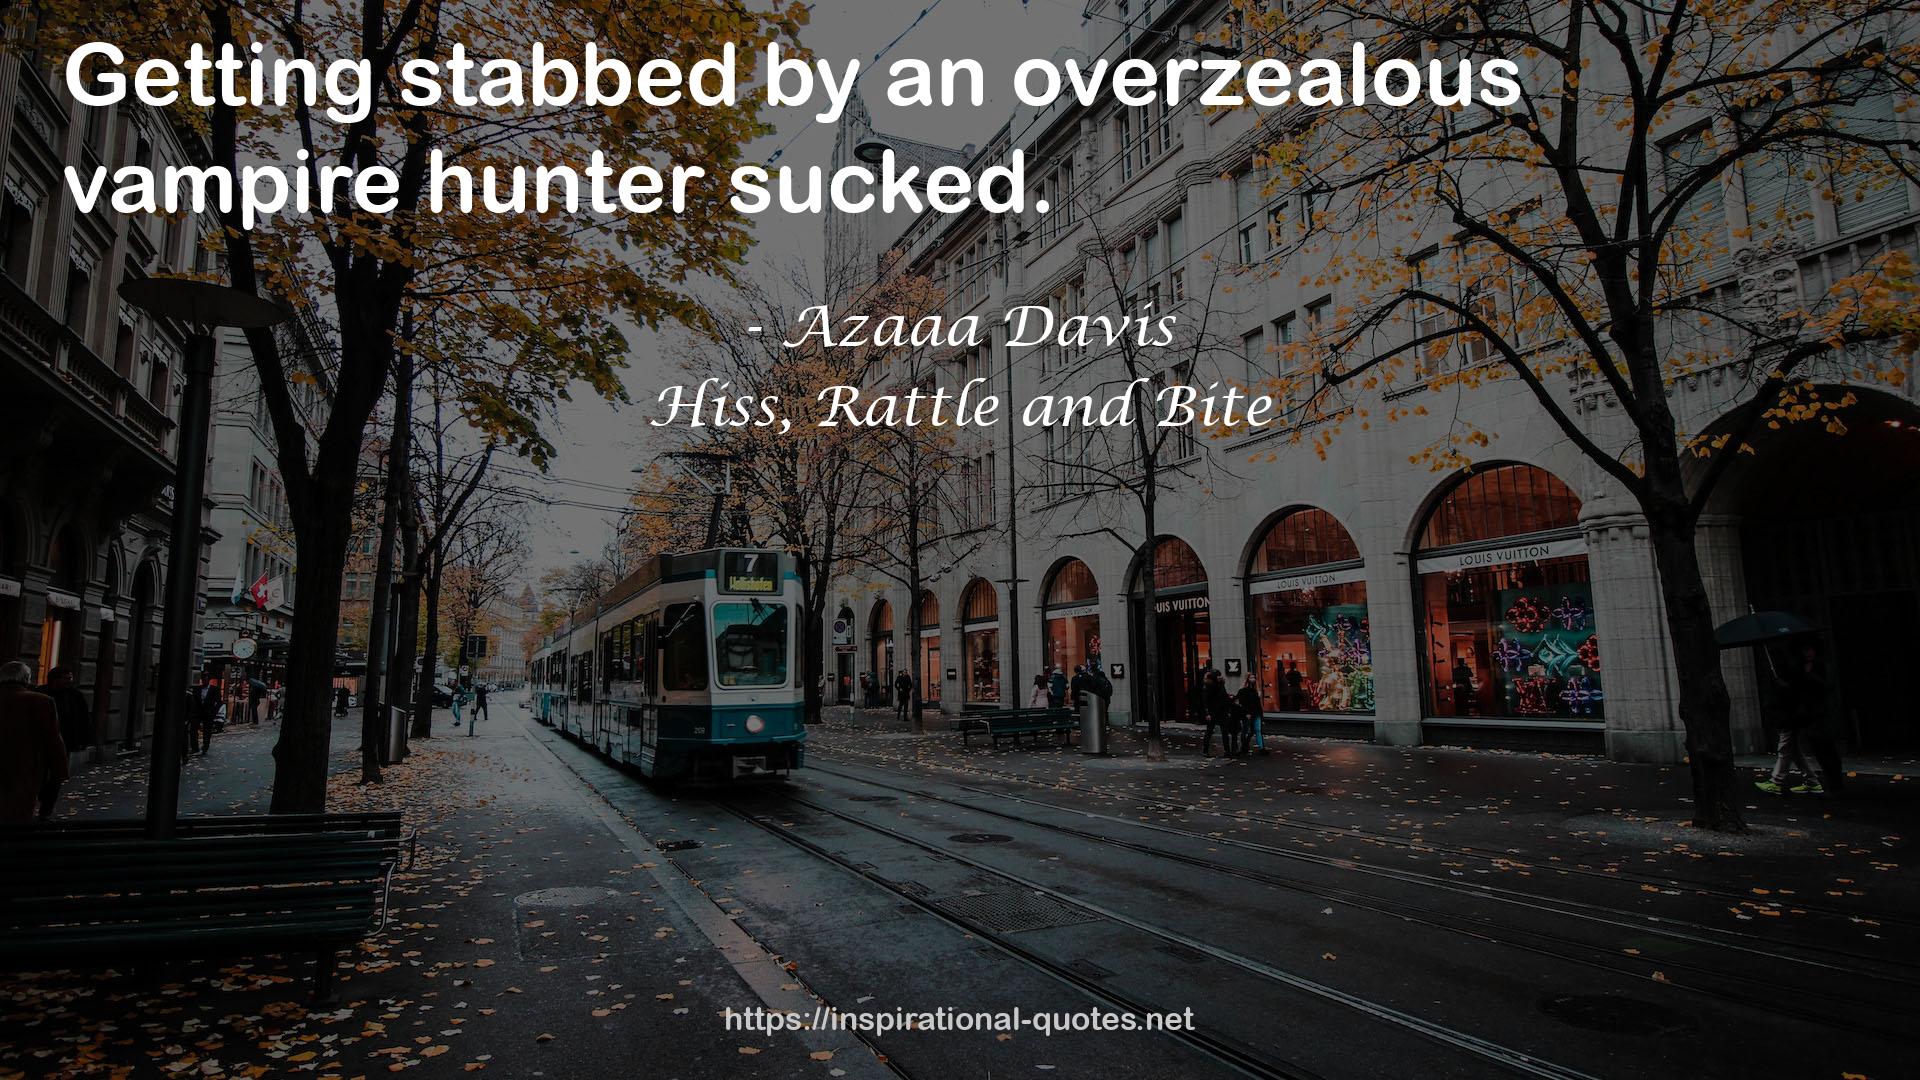 Hiss, Rattle and Bite QUOTES